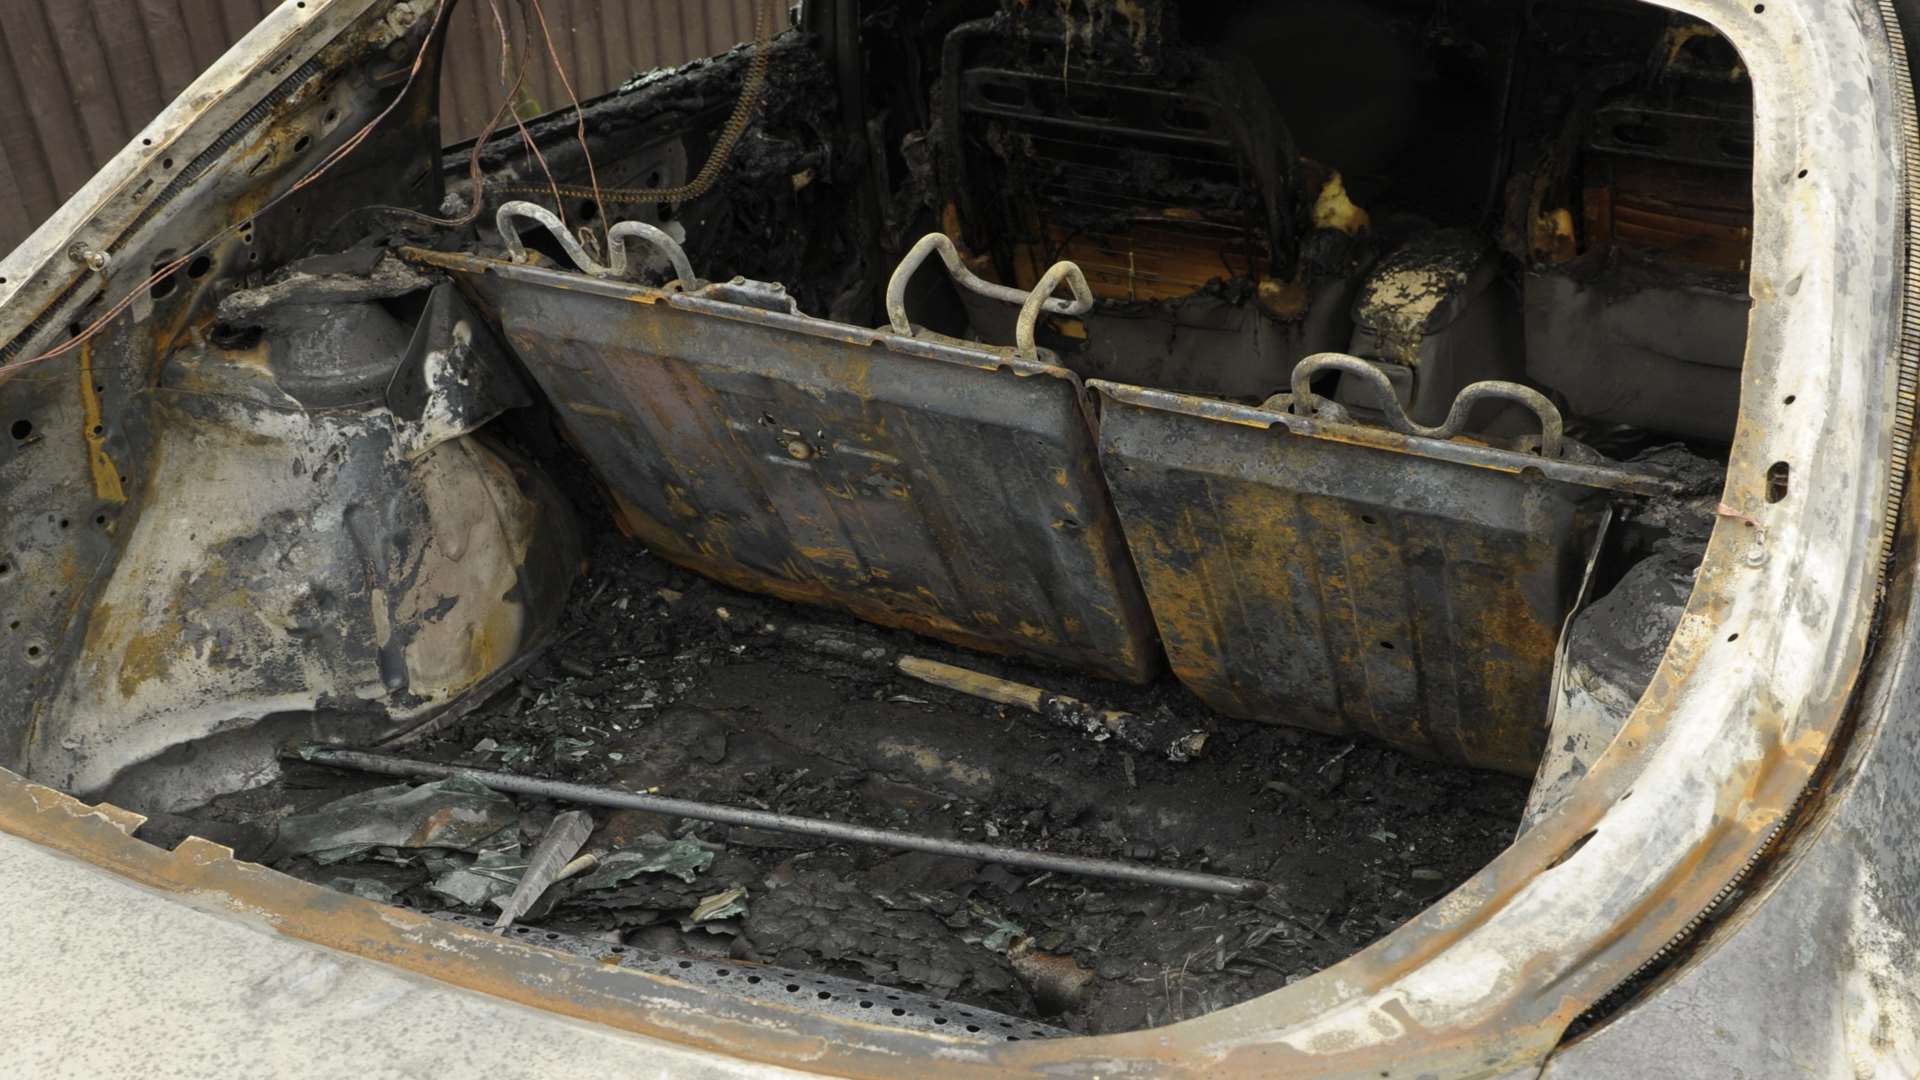 One of the burnt out cars in Larkspur Road, Walderslade